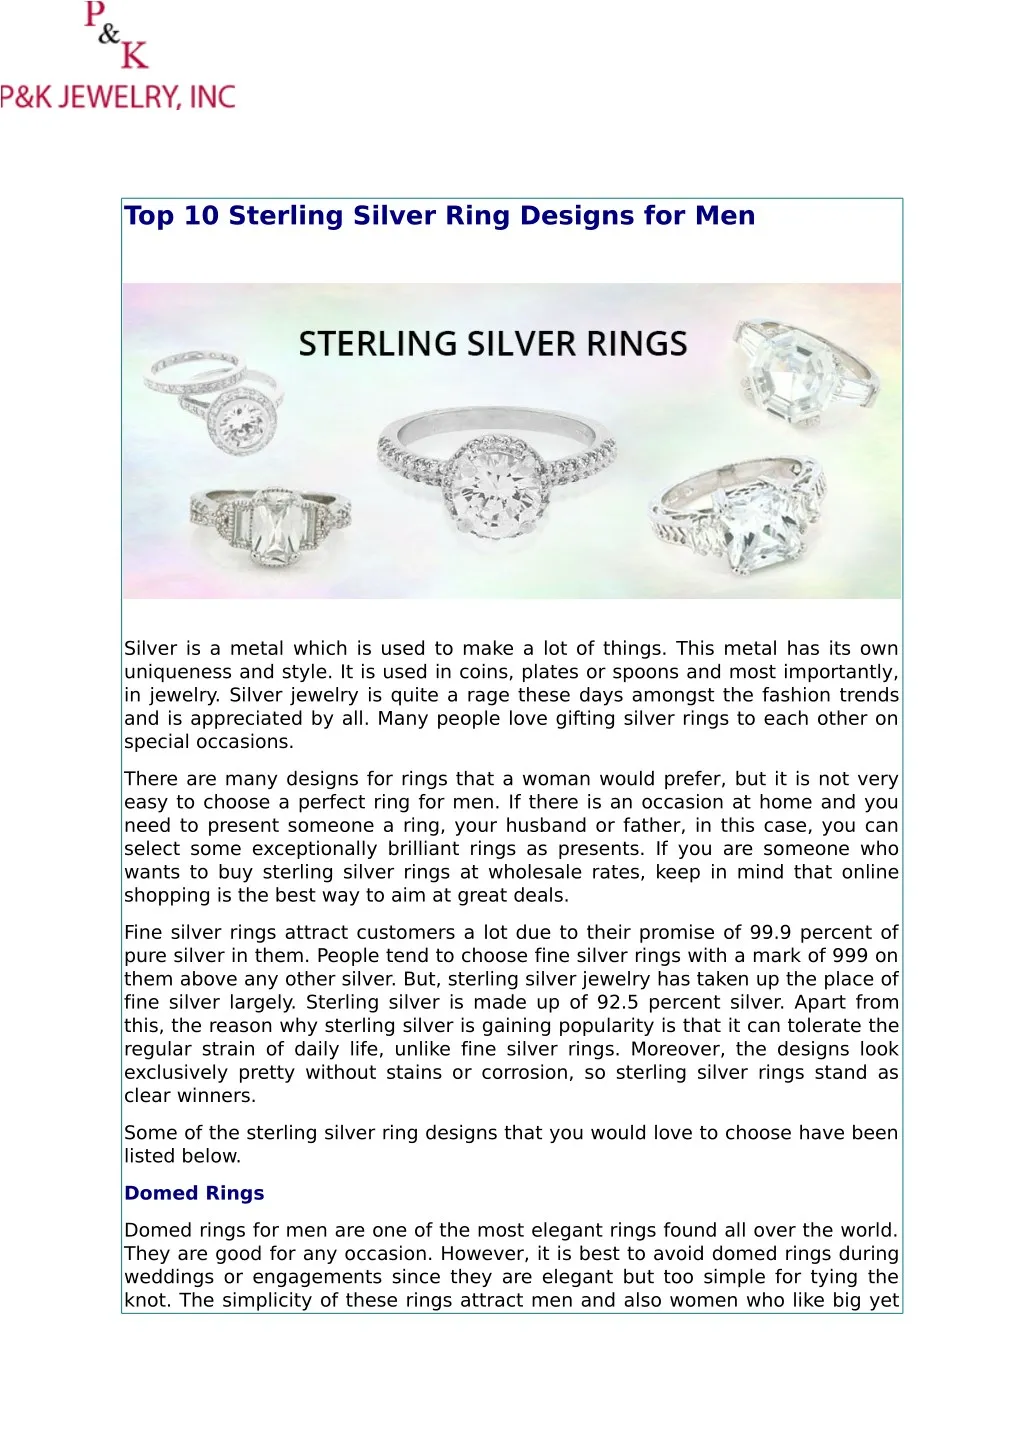 top 10 sterling silver ring designs for men